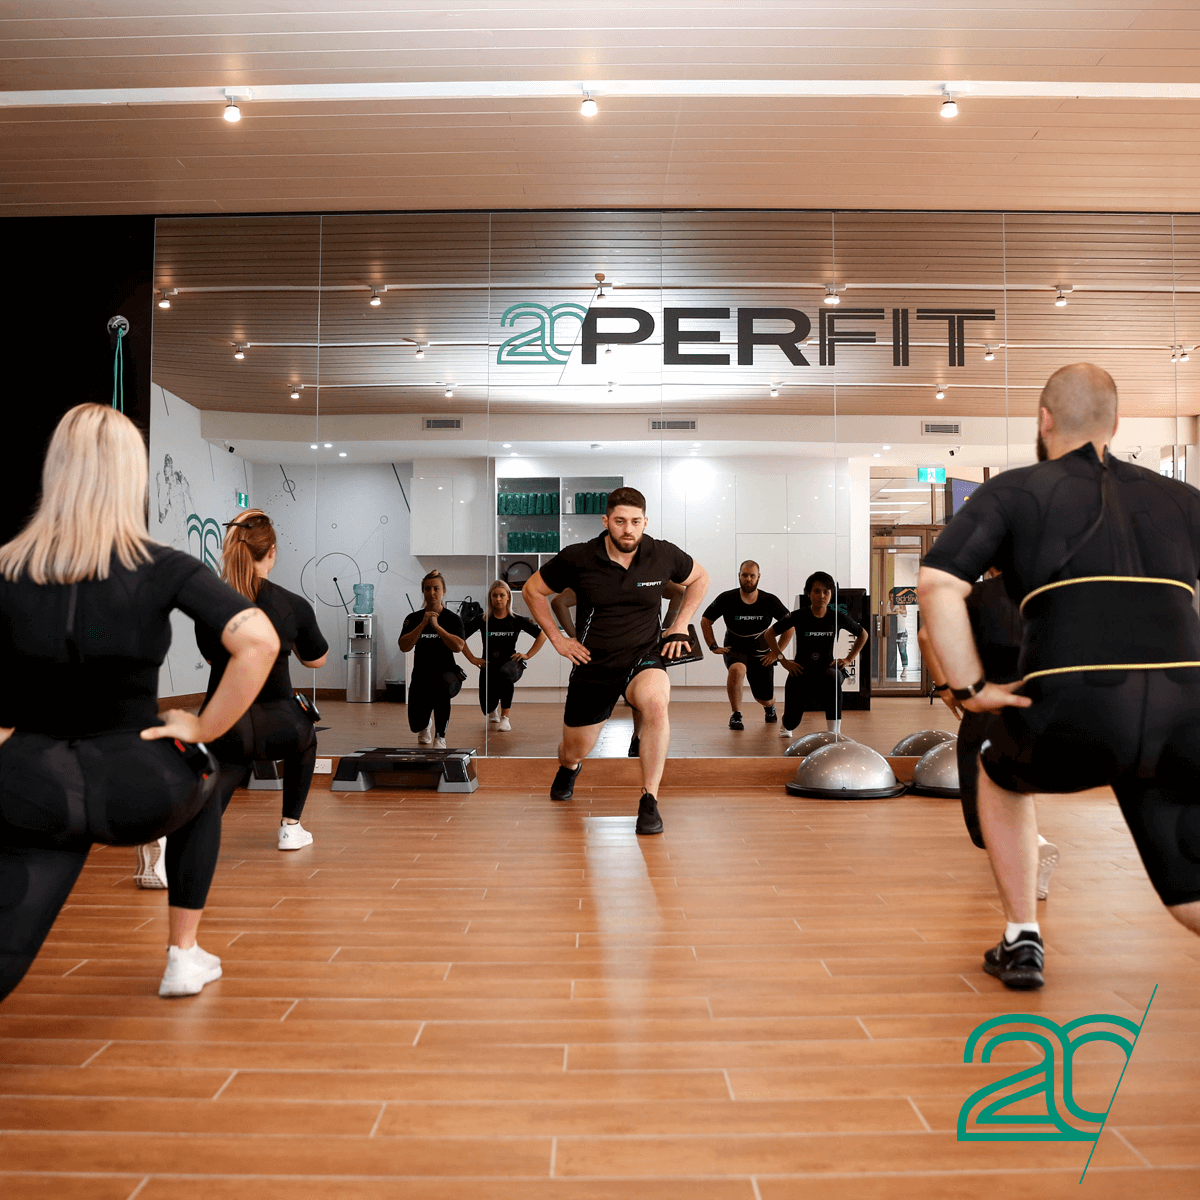 Class Session Using 20PerFit's EMS Technology at the Parramatta Studio